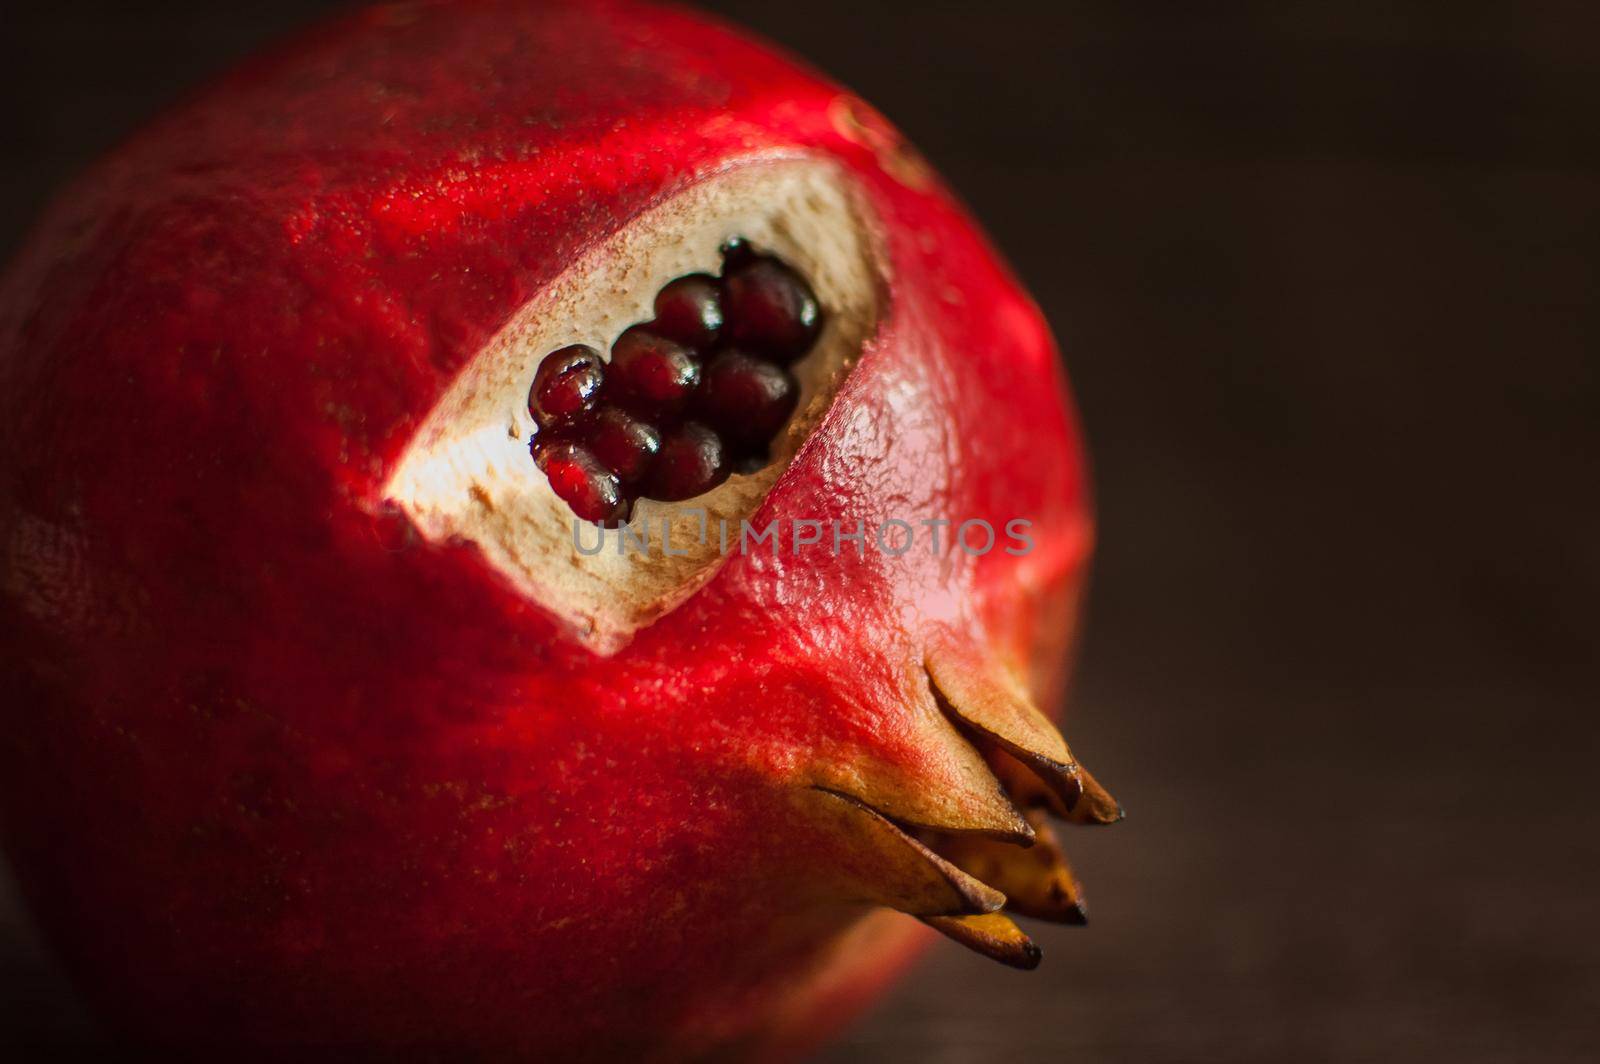 Juicy garnet ripe pomegranate fruit on wooden background. Healthy eating, exotic fruits